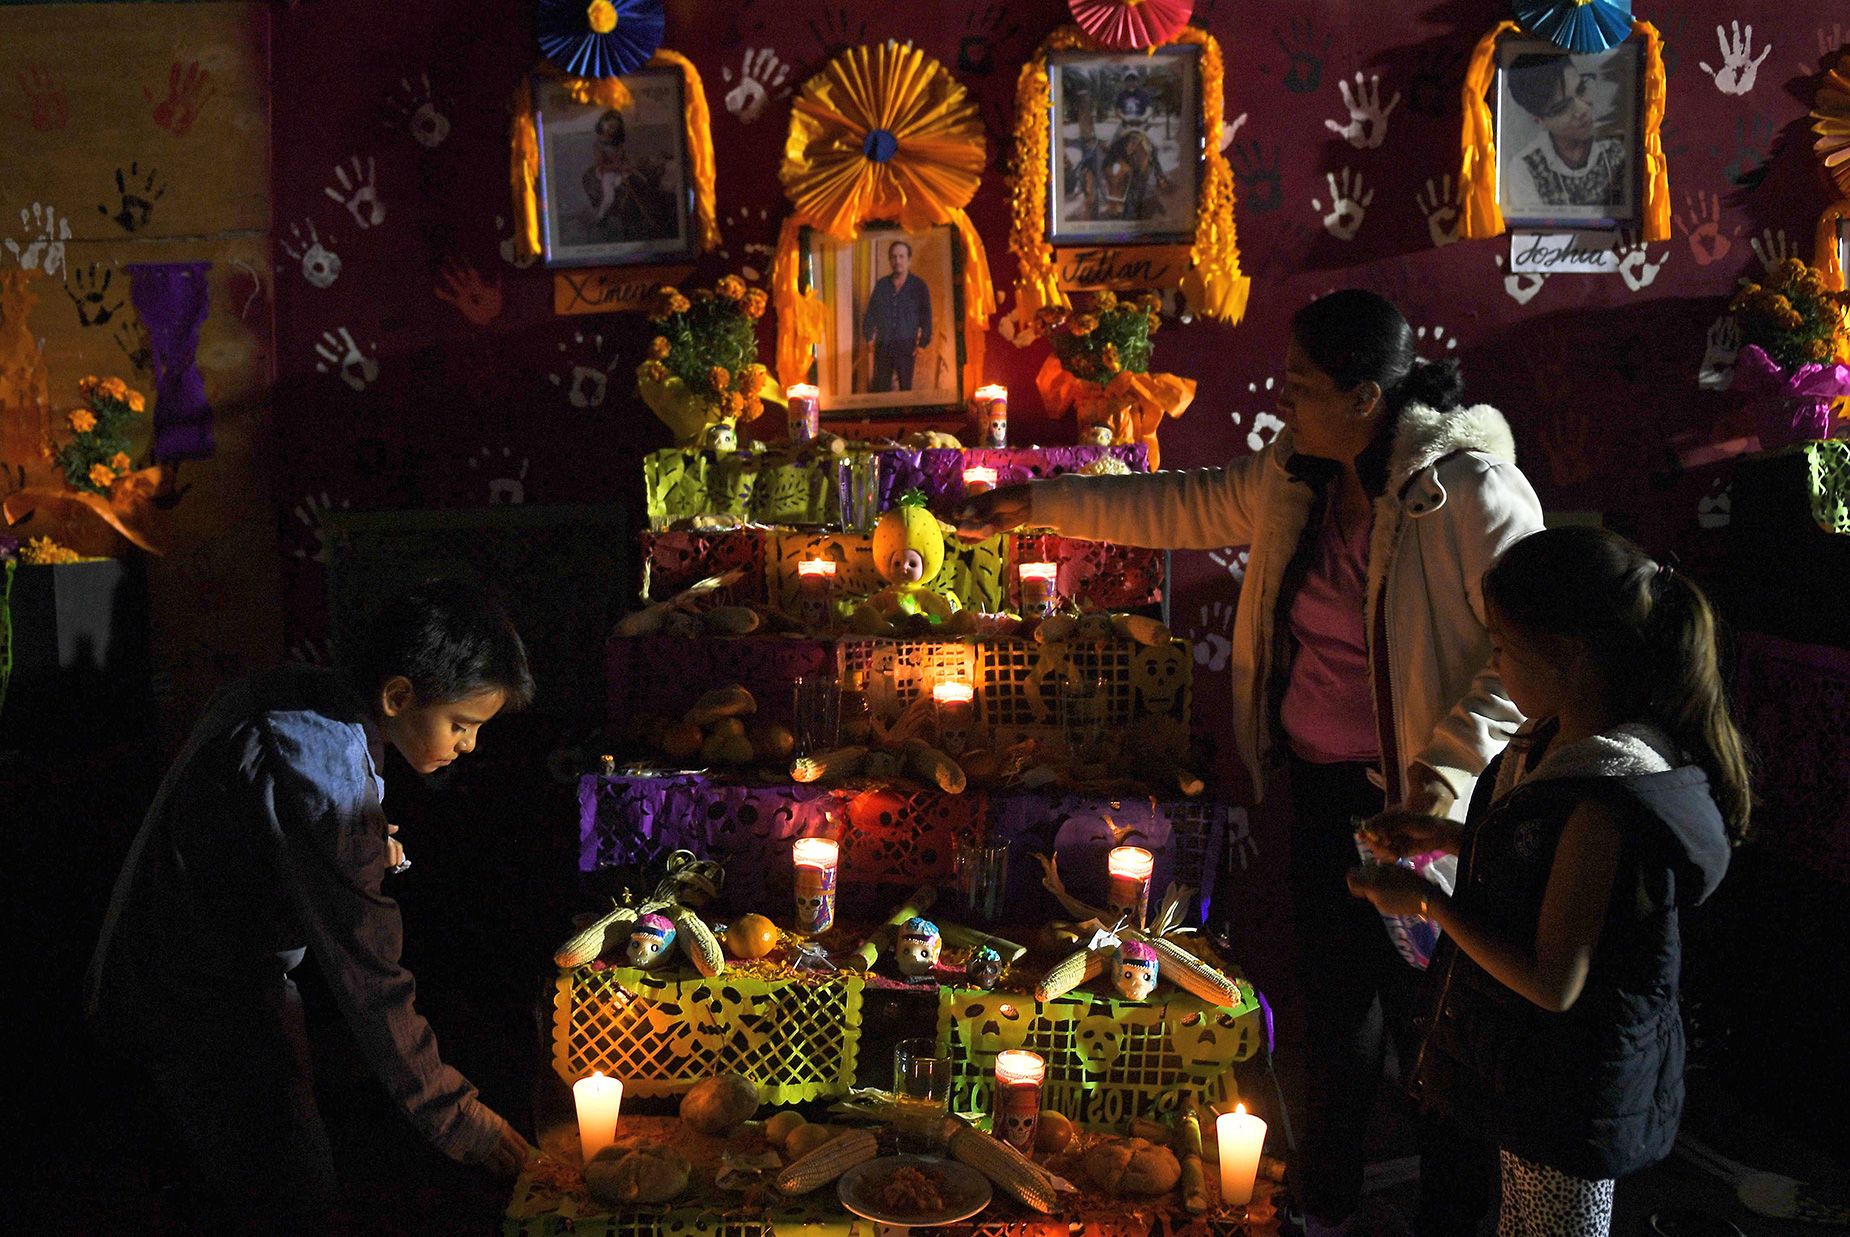 Day of the Dead is full of longstanding traditions meant to honor ancestors